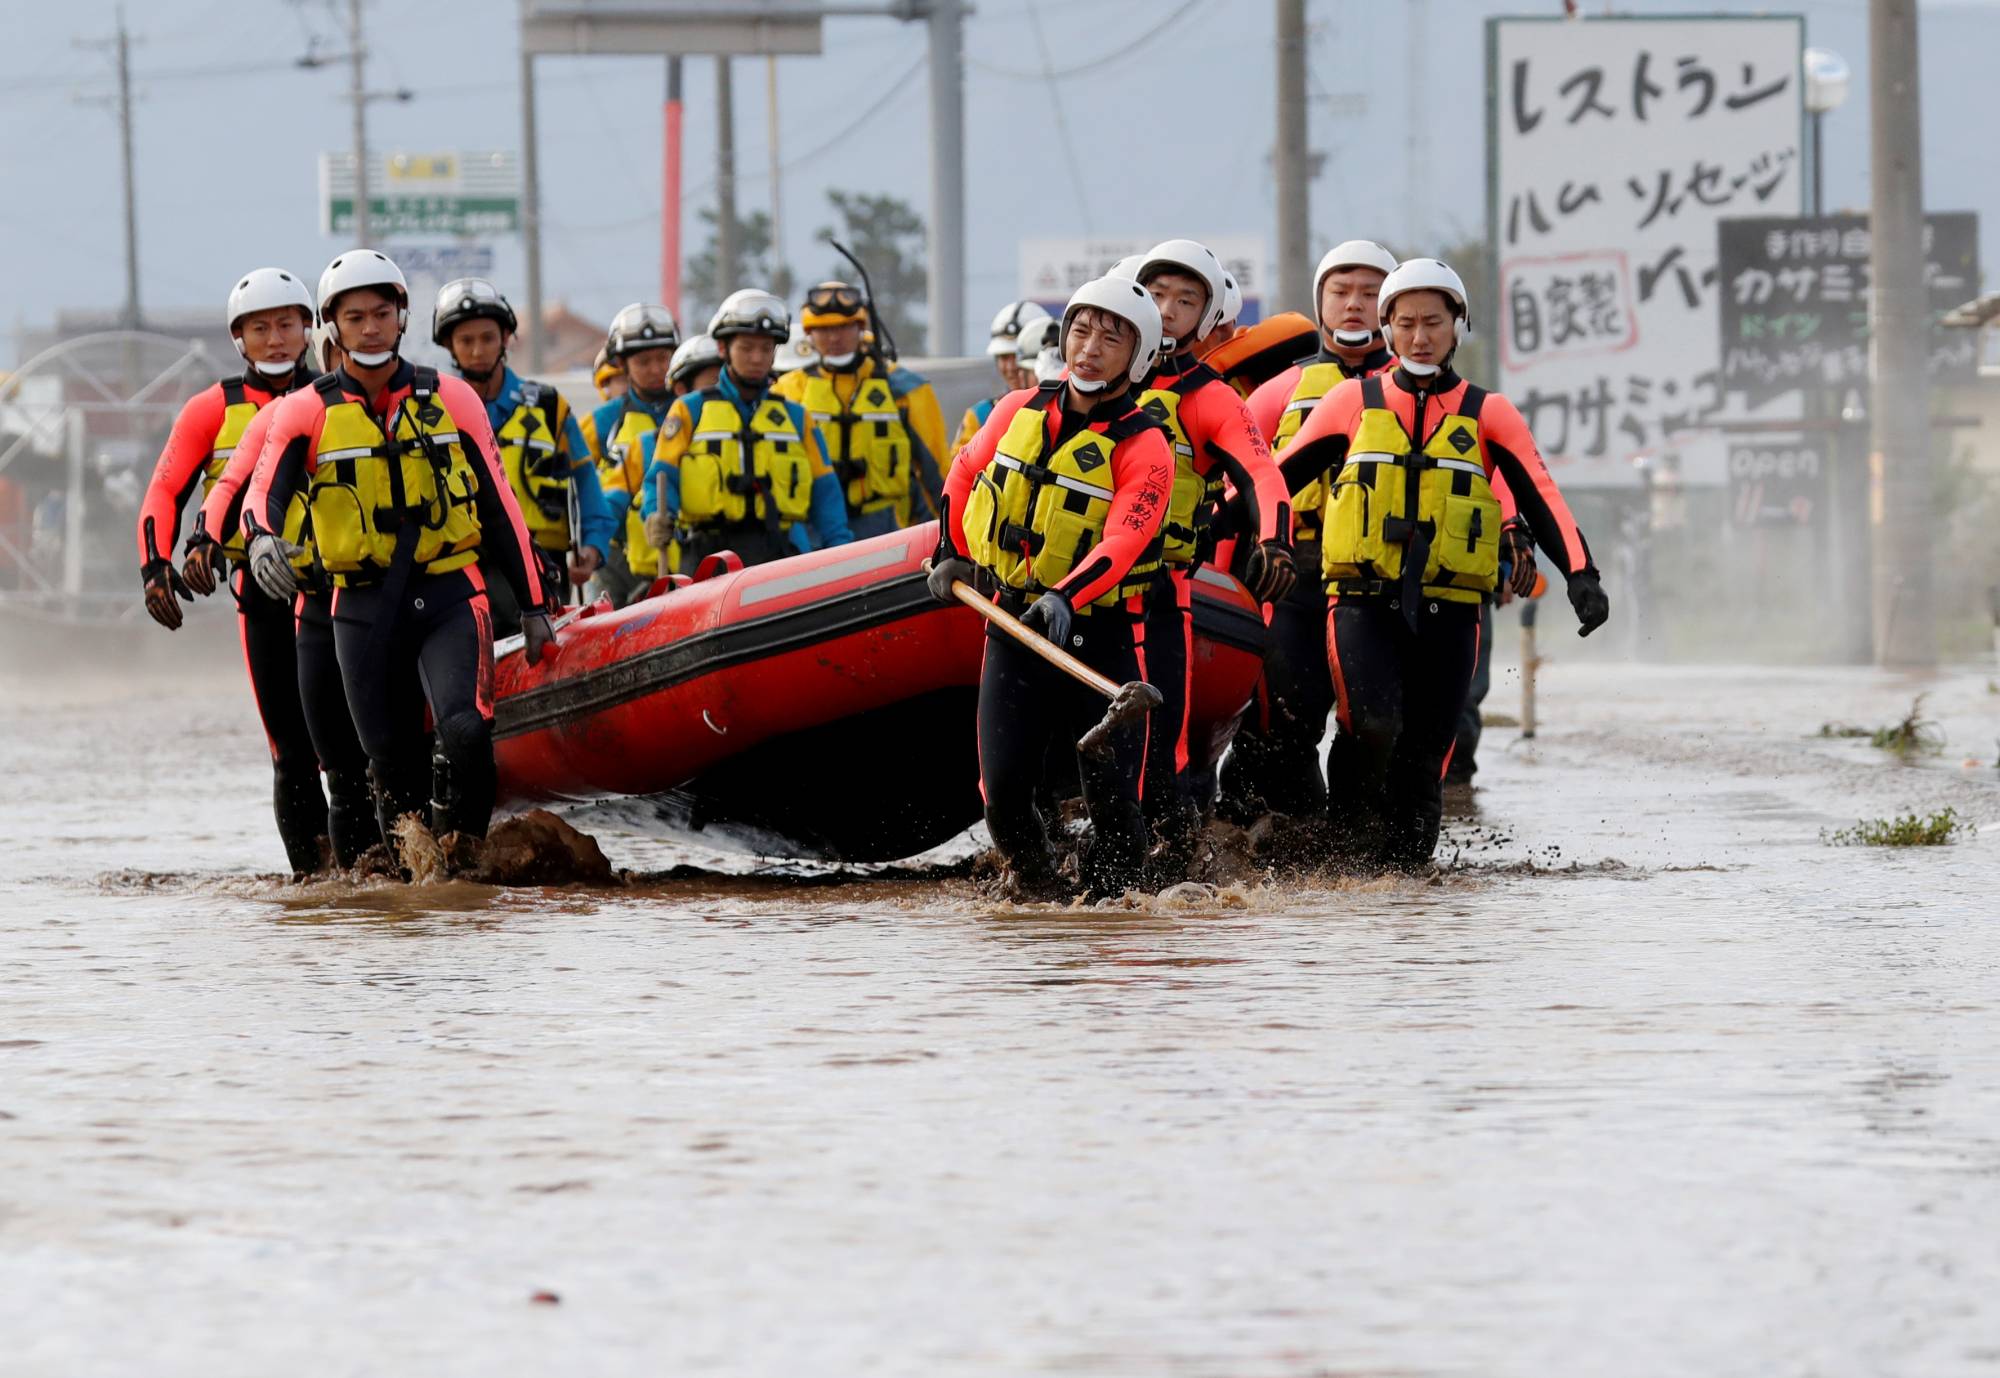 Rescue workers search a flooded area in the aftermath of Typhoon Hagibis, which caused severe floods at the Chikuma River in Nagano Prefecture in October 2019. | REUTERS